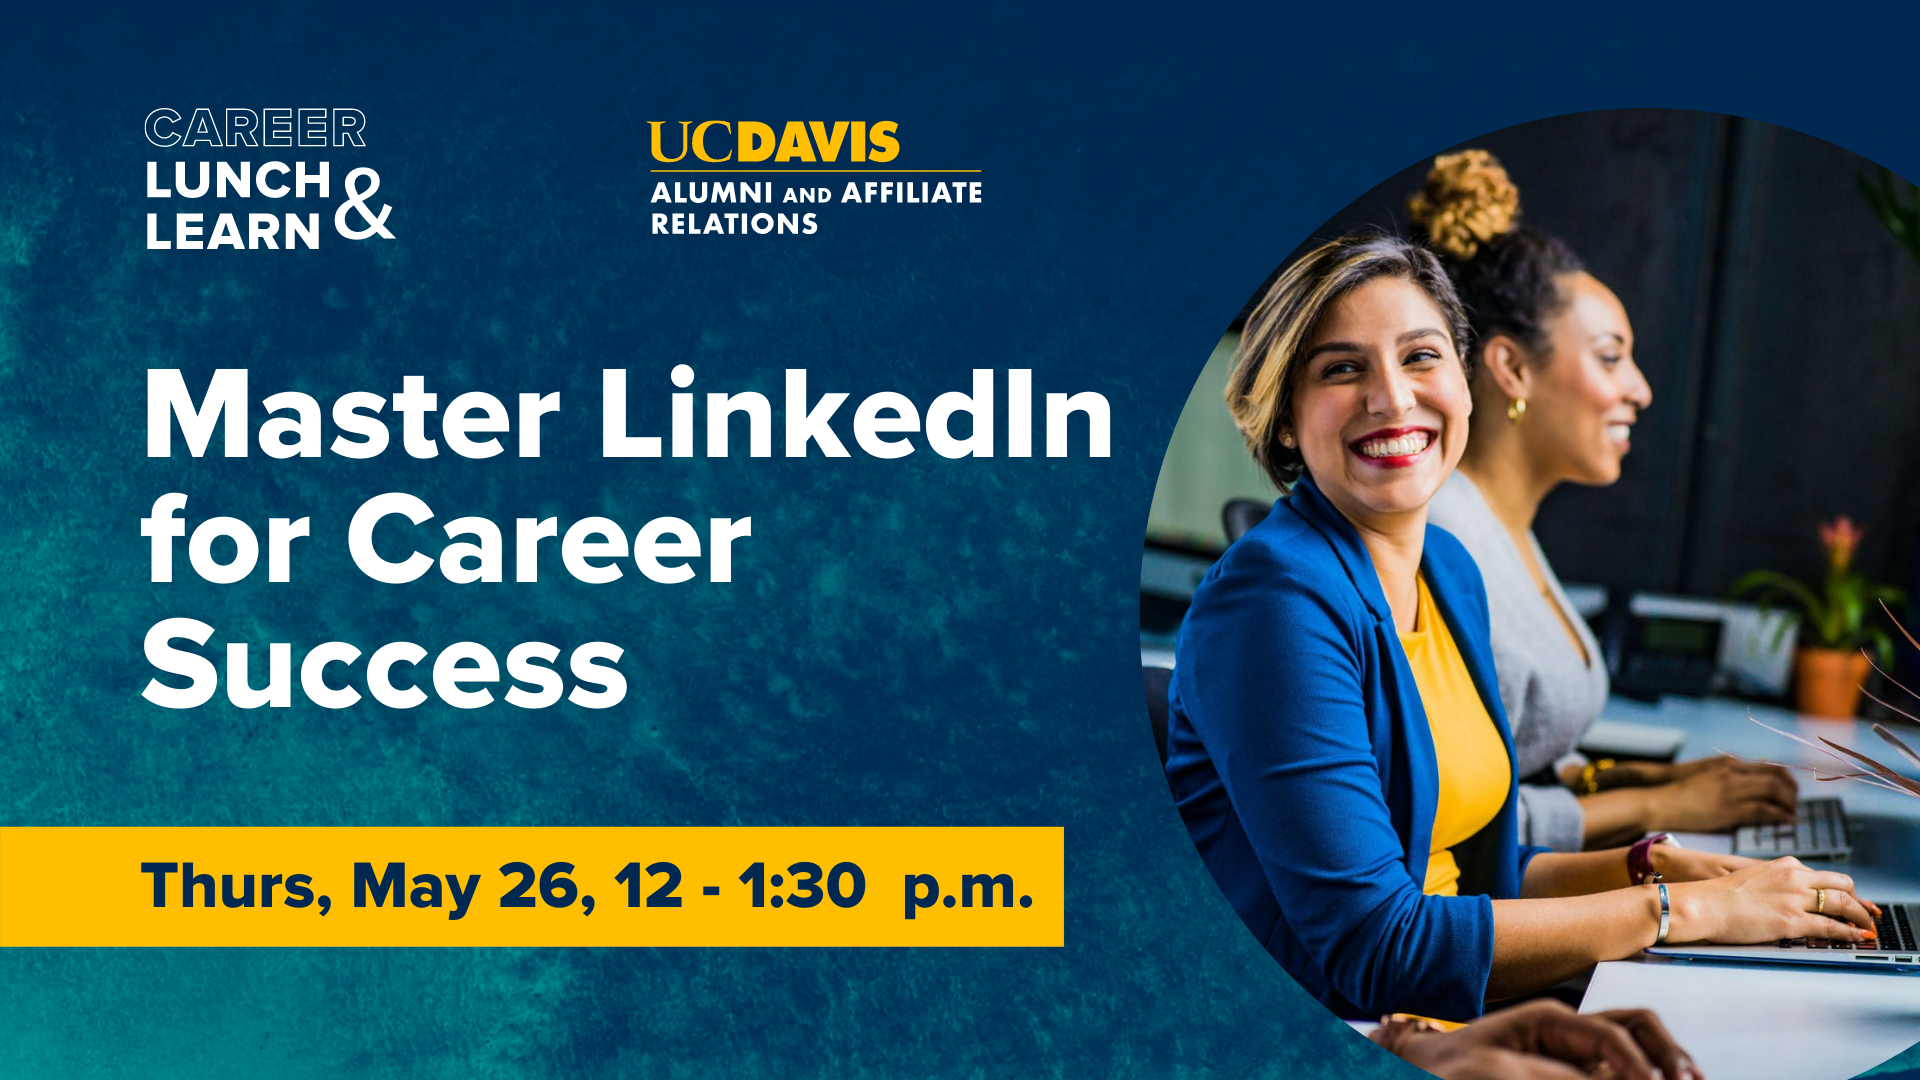 Image of woman sitting in front of computer smiling. Text reads: Career Lunch & Learn, UC Davis Alumni and Affiliate Relations, Master LinkedIn for Career Success, Thurs, May 26, 12-1:30 p.m.